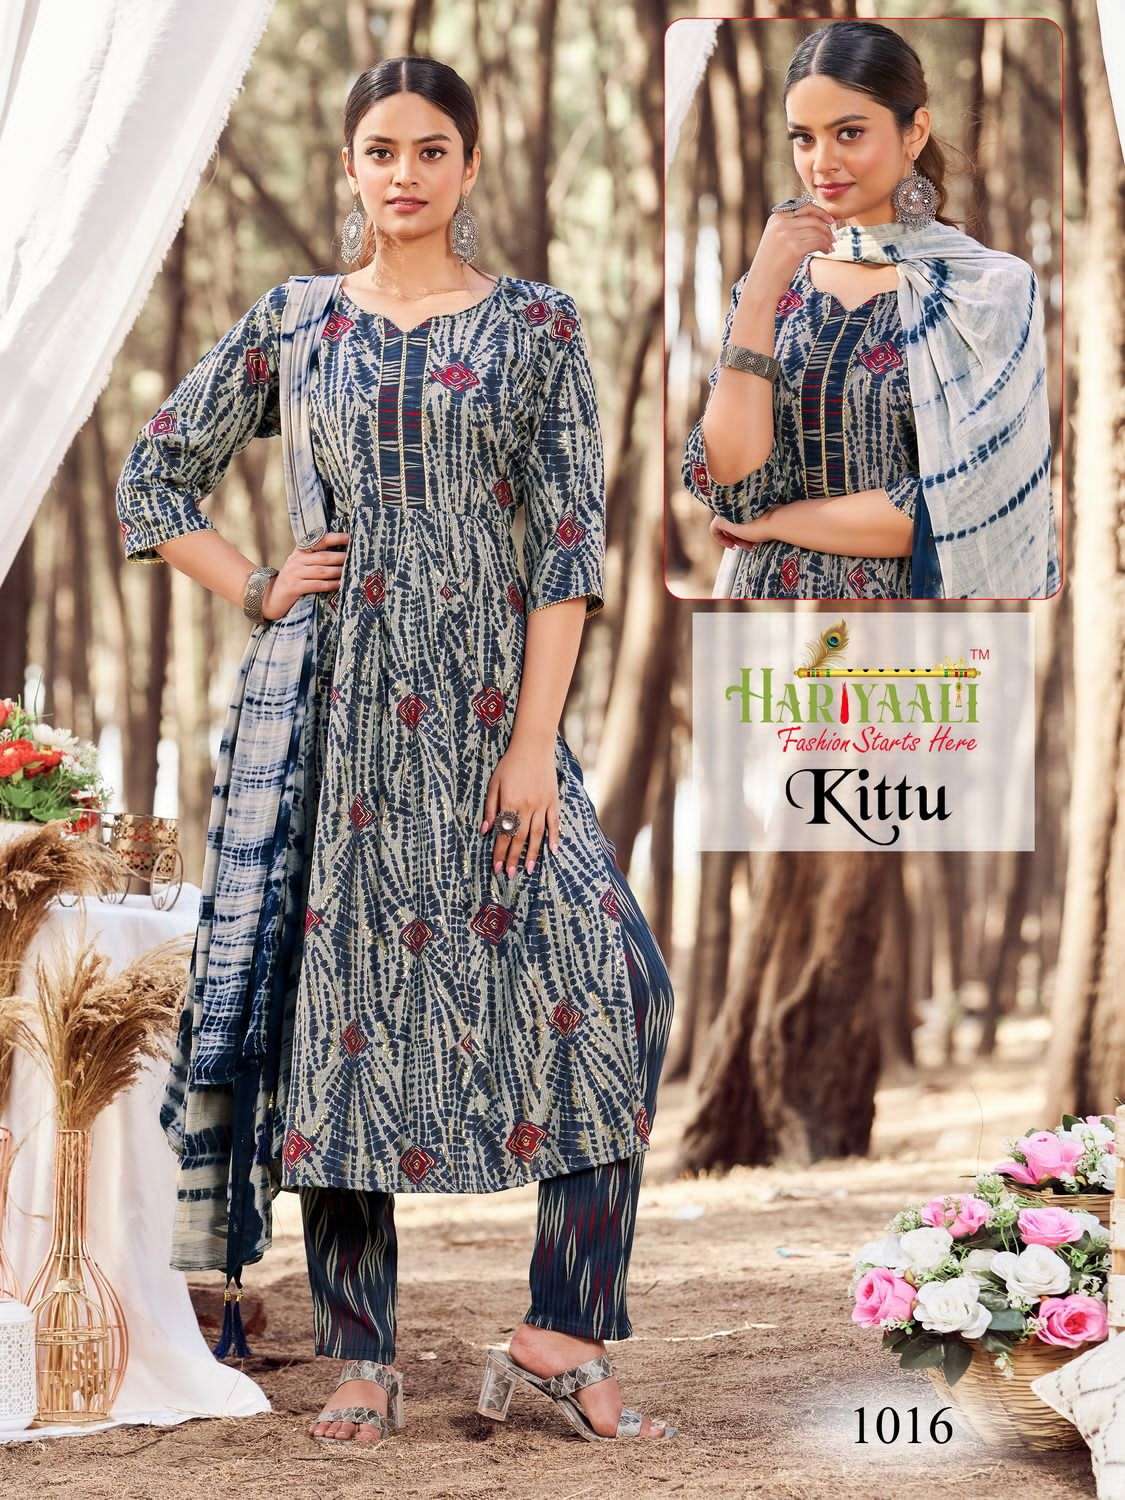 Kittu By Hariyaali 1001 To 1024 Series Designer Festive Suits Collection Beautiful Stylish Fancy Colorful Party Wear & Occasional Wear Rayon Foil Dresses At Wholesale Price